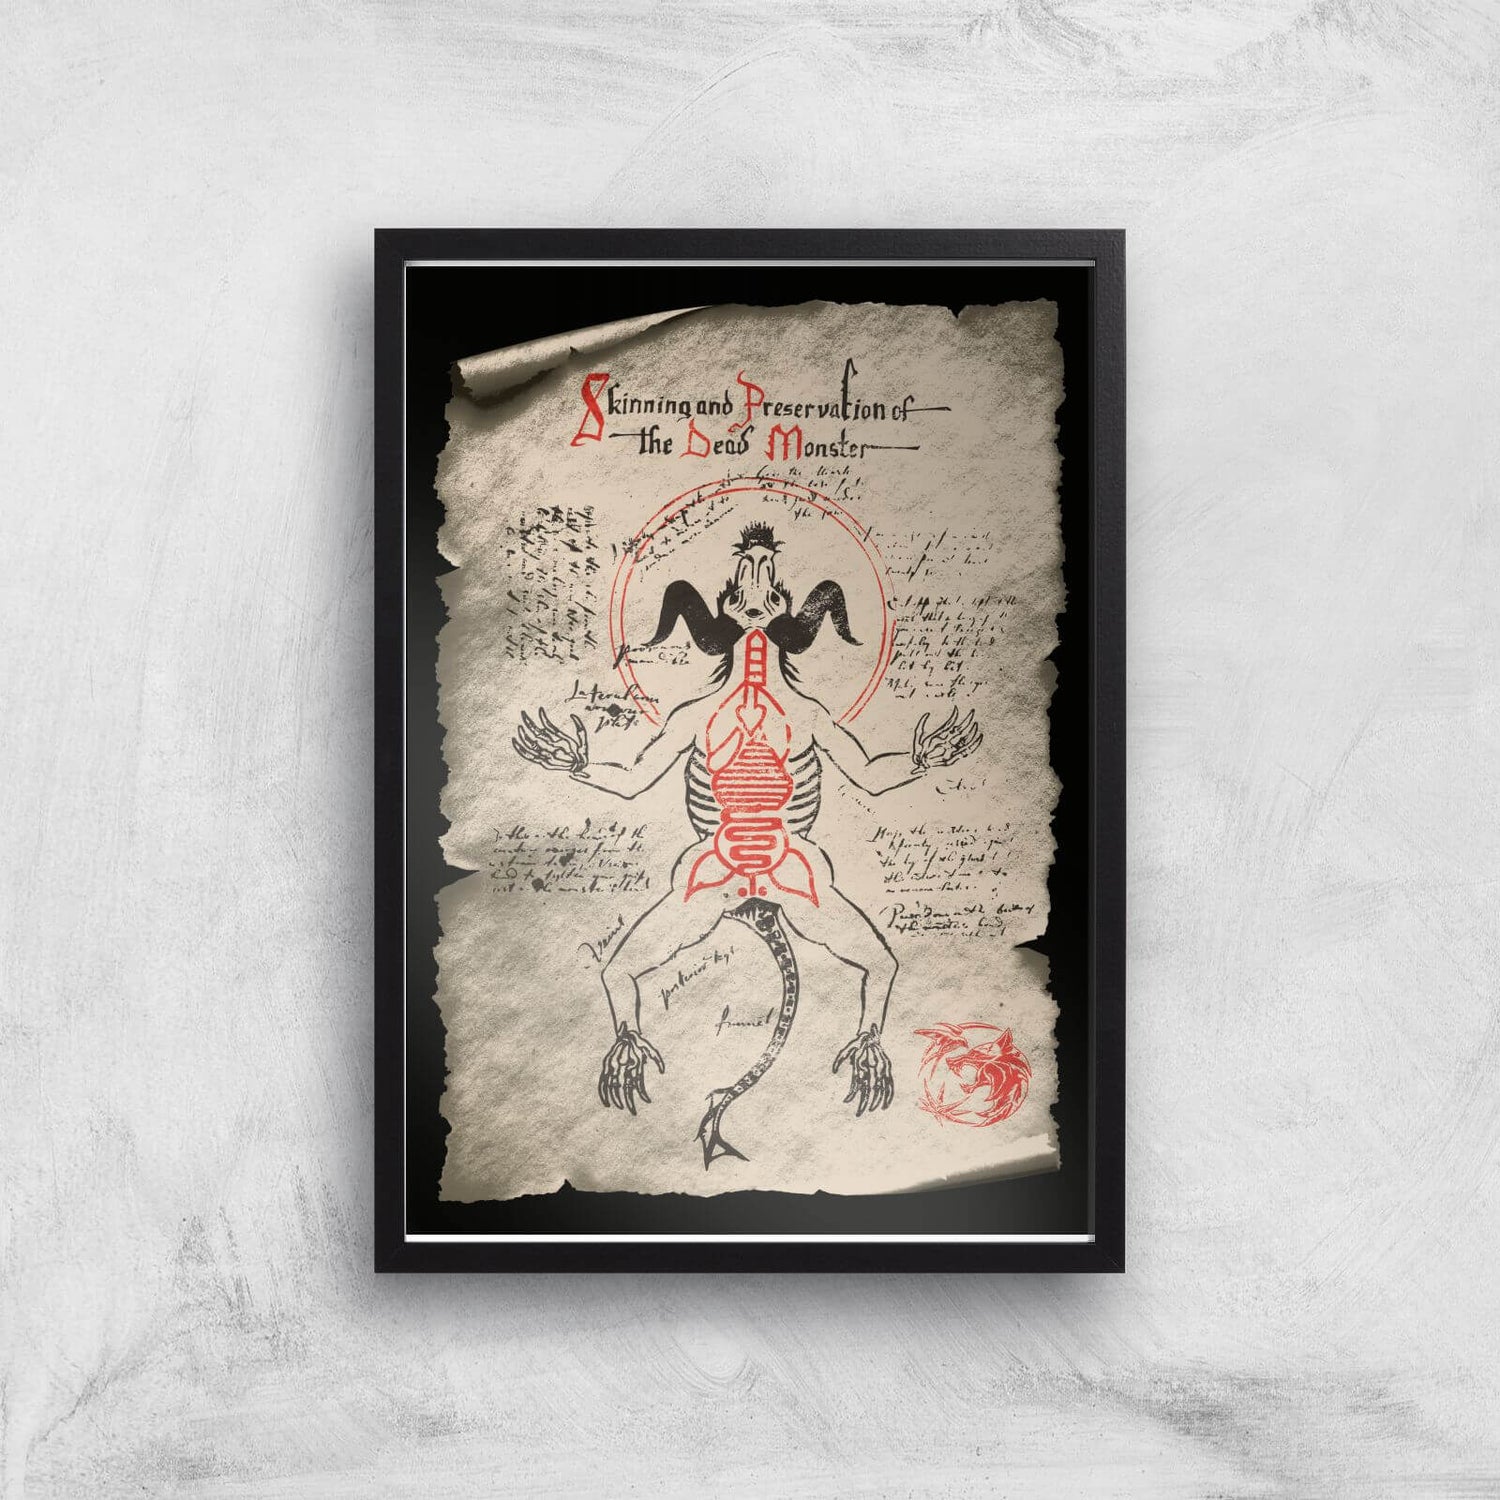 The Witcher Skinning And Preservation Of The Dead Monster Giclee Art Print - A4 - Black Frame